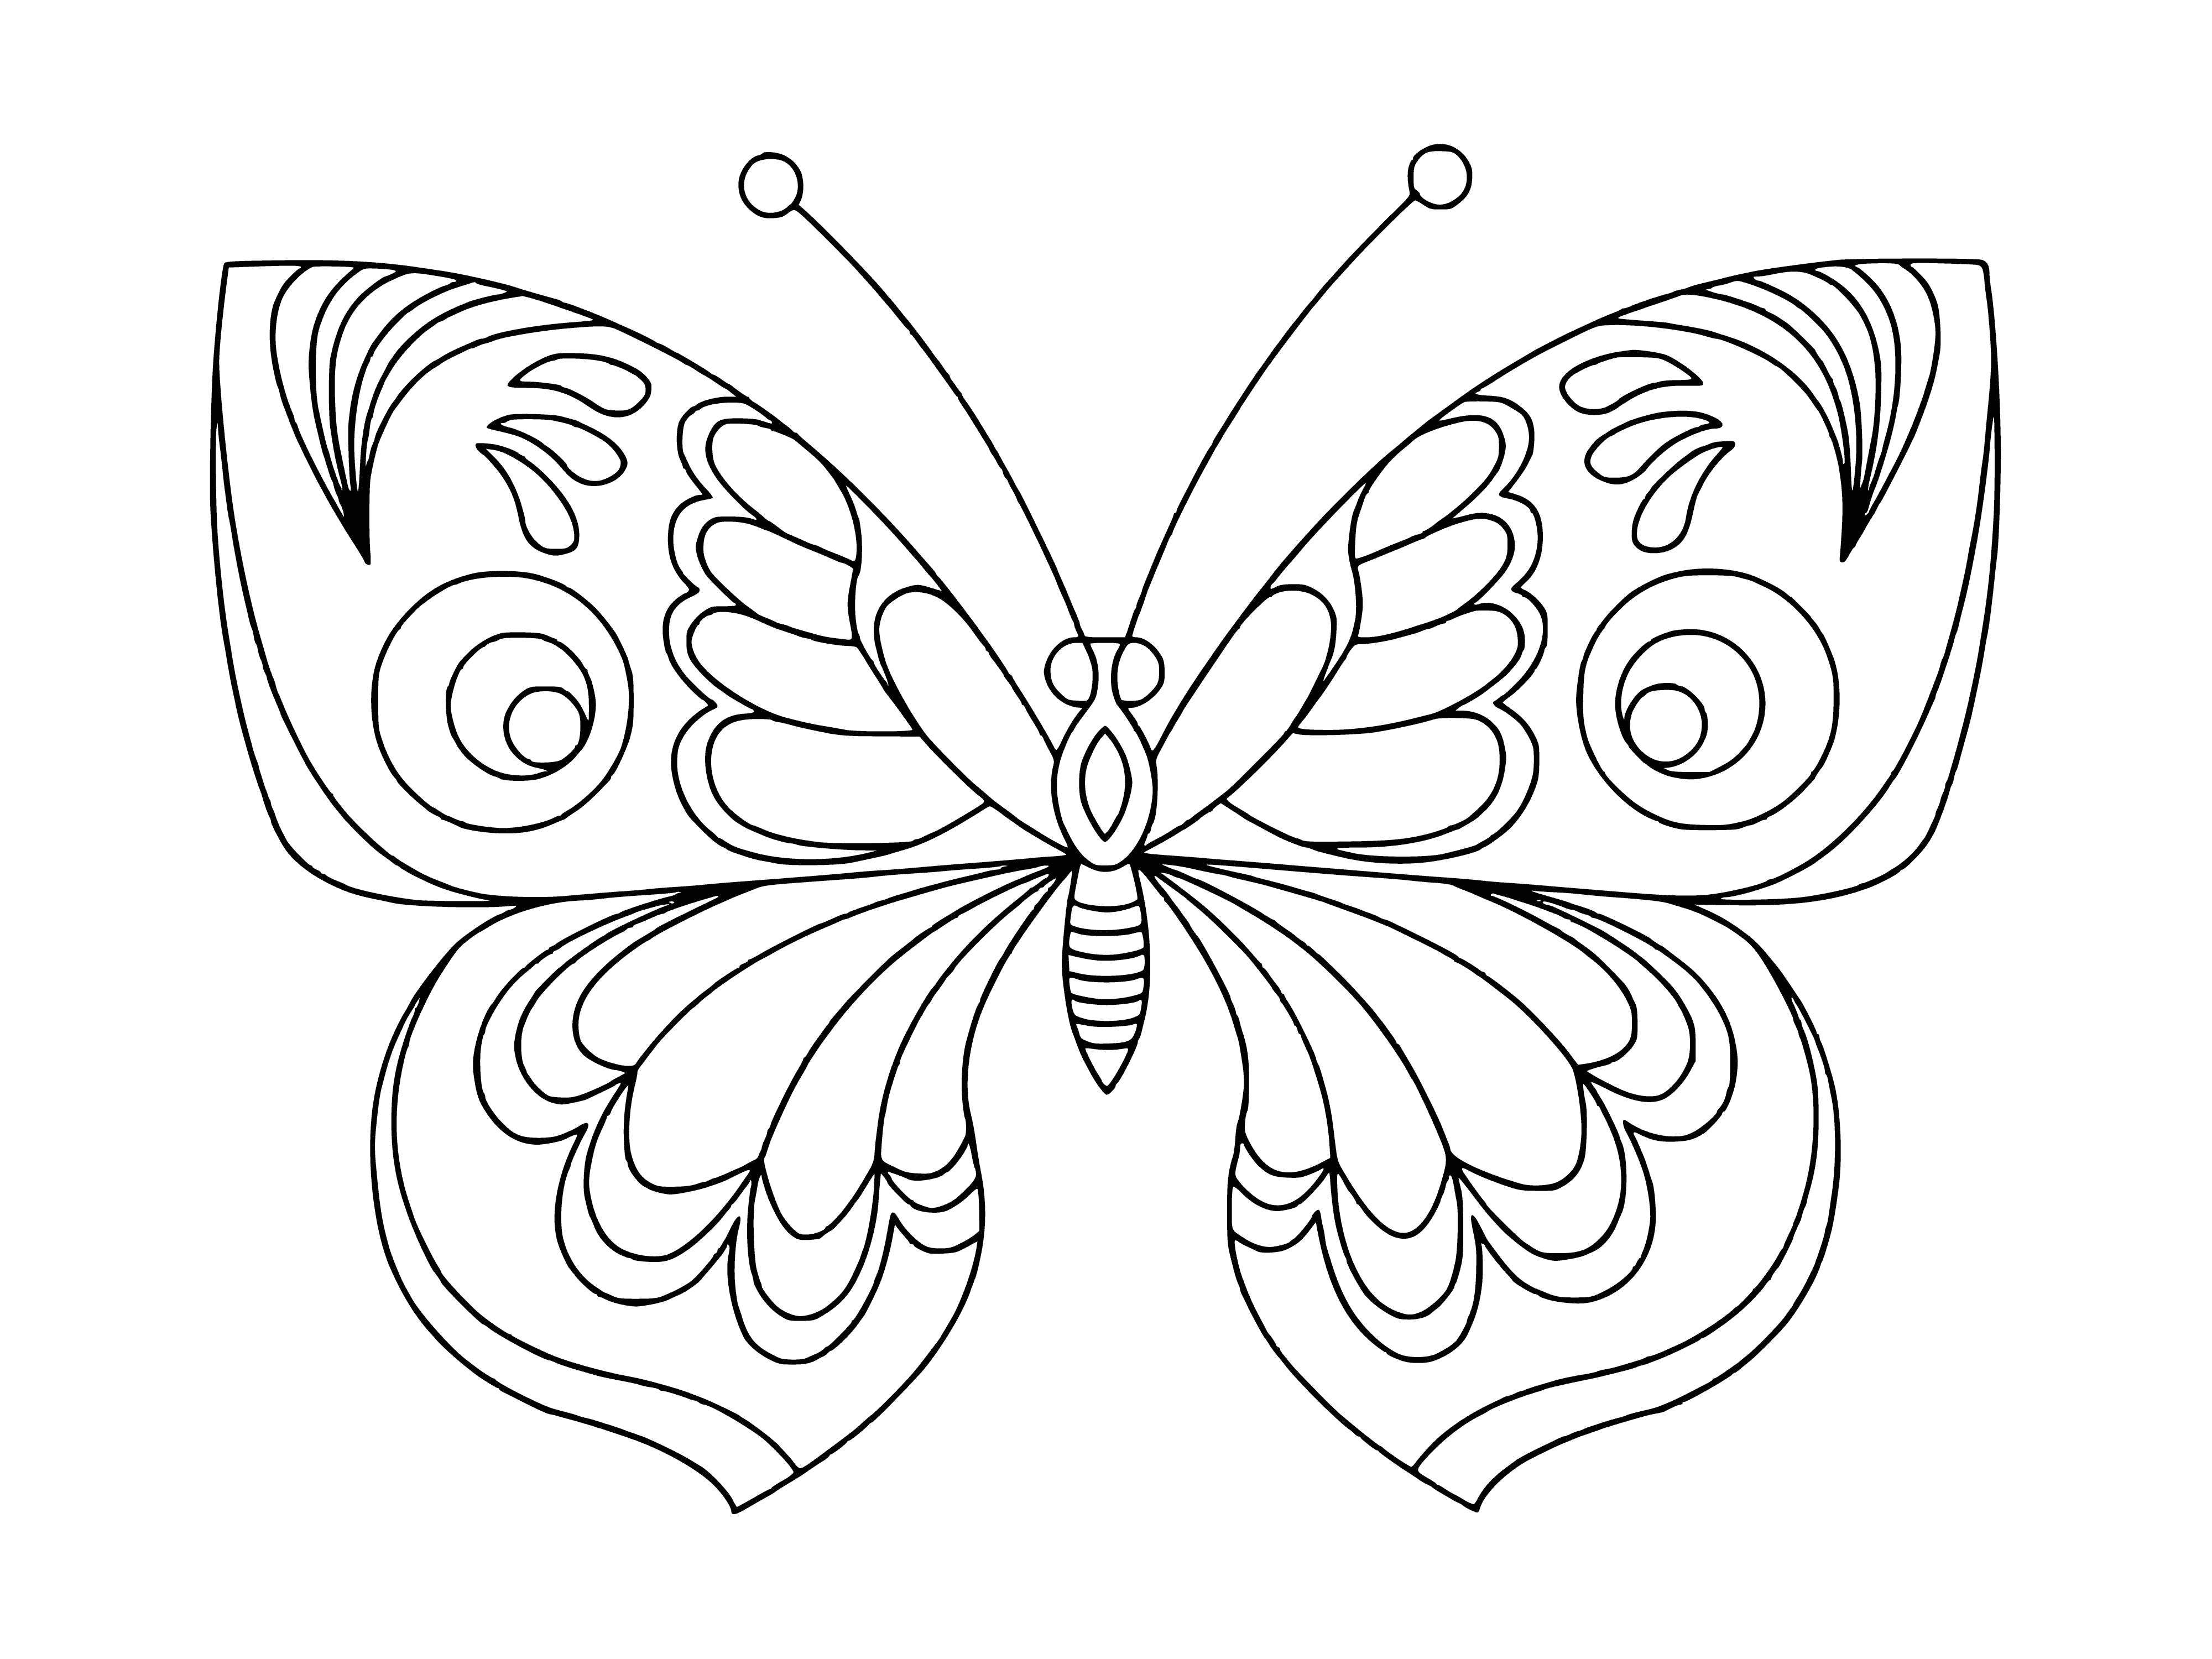 coloring page: Two brightly-colored butterflies resting on a pink flower. One is yellow/black and the other is orange/black.